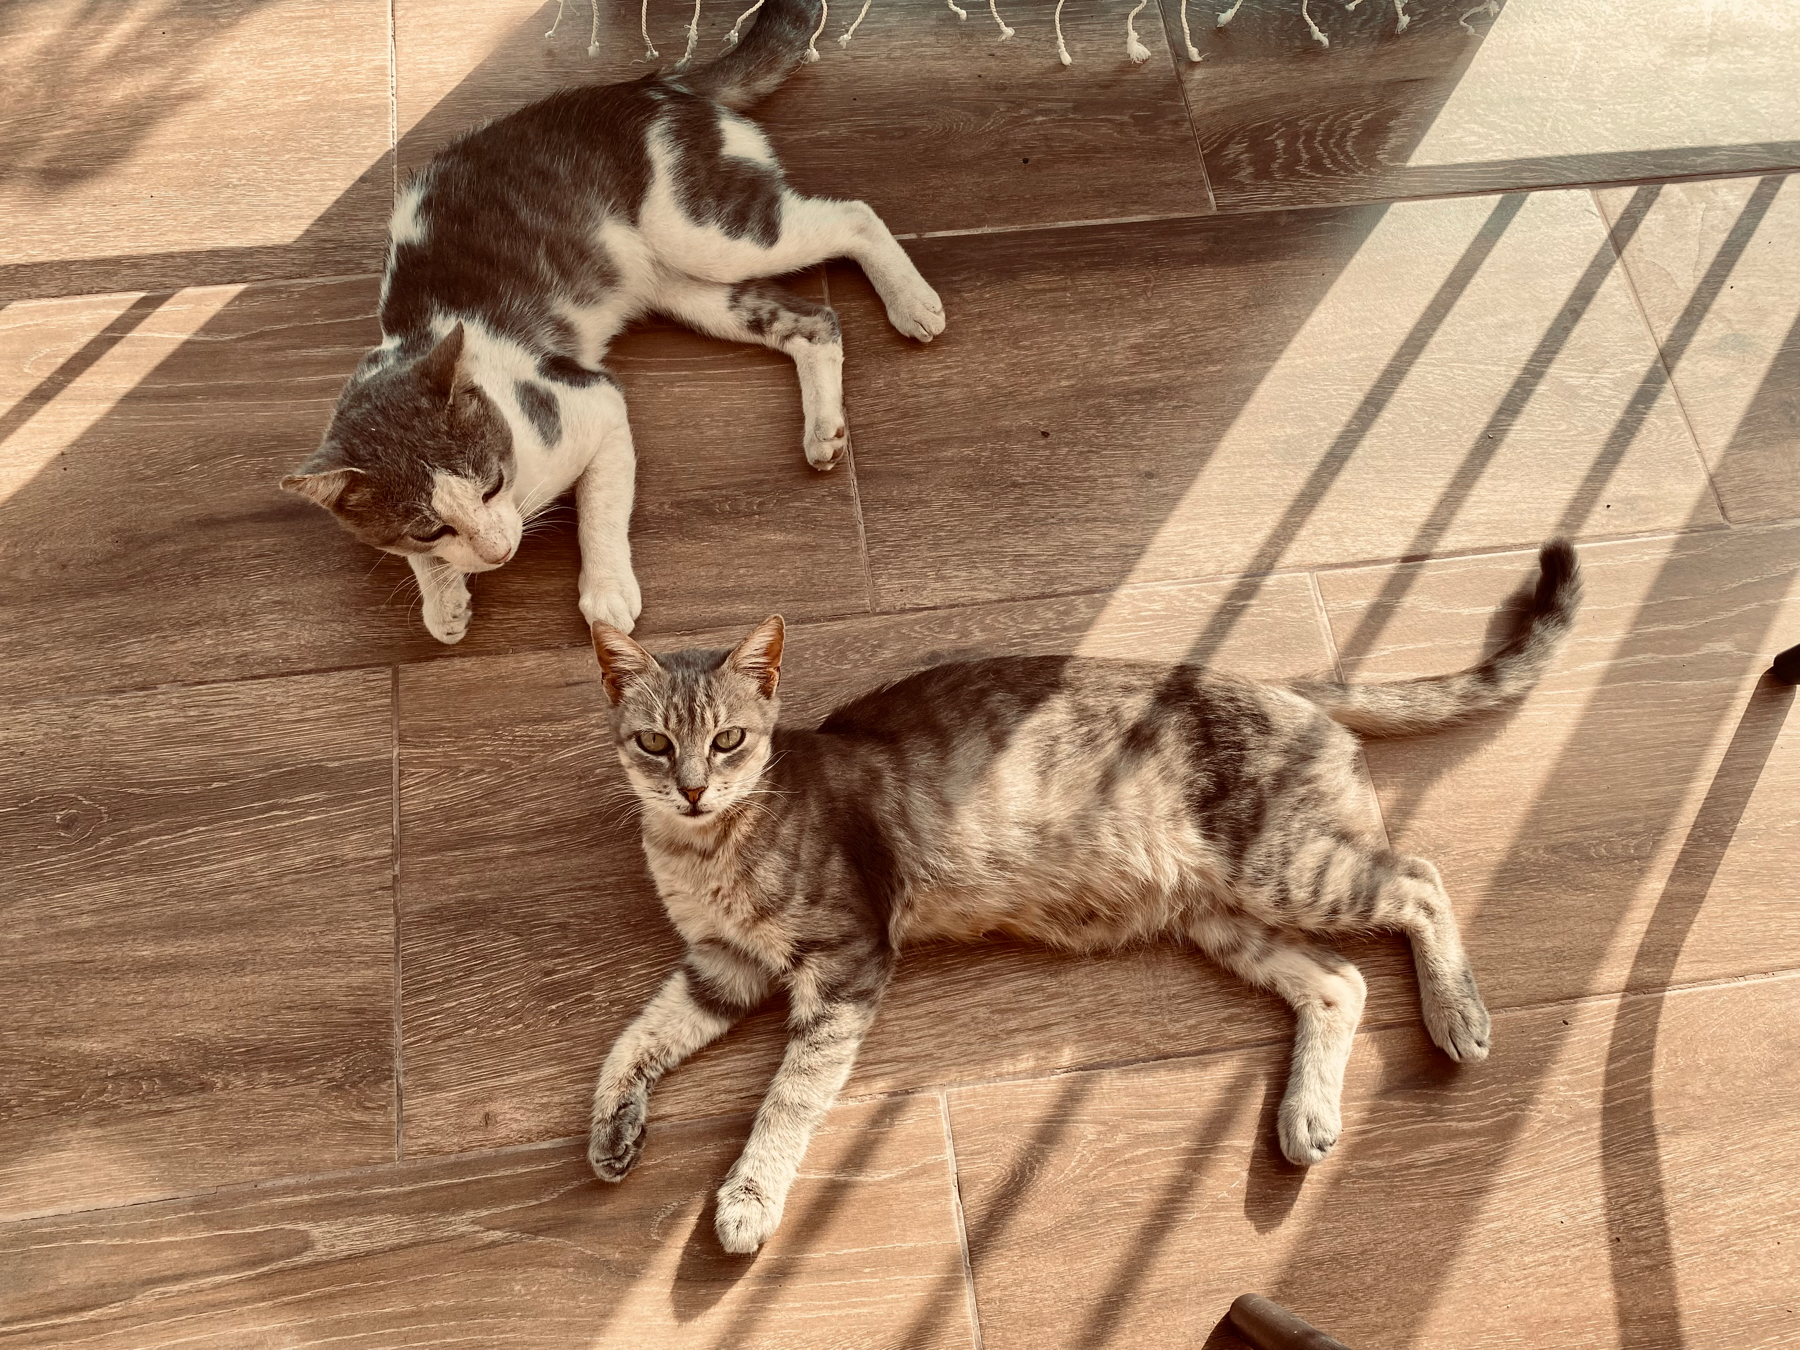 A tabby and a gray and white cat sprawled on a stone floor in sunlight and shadow